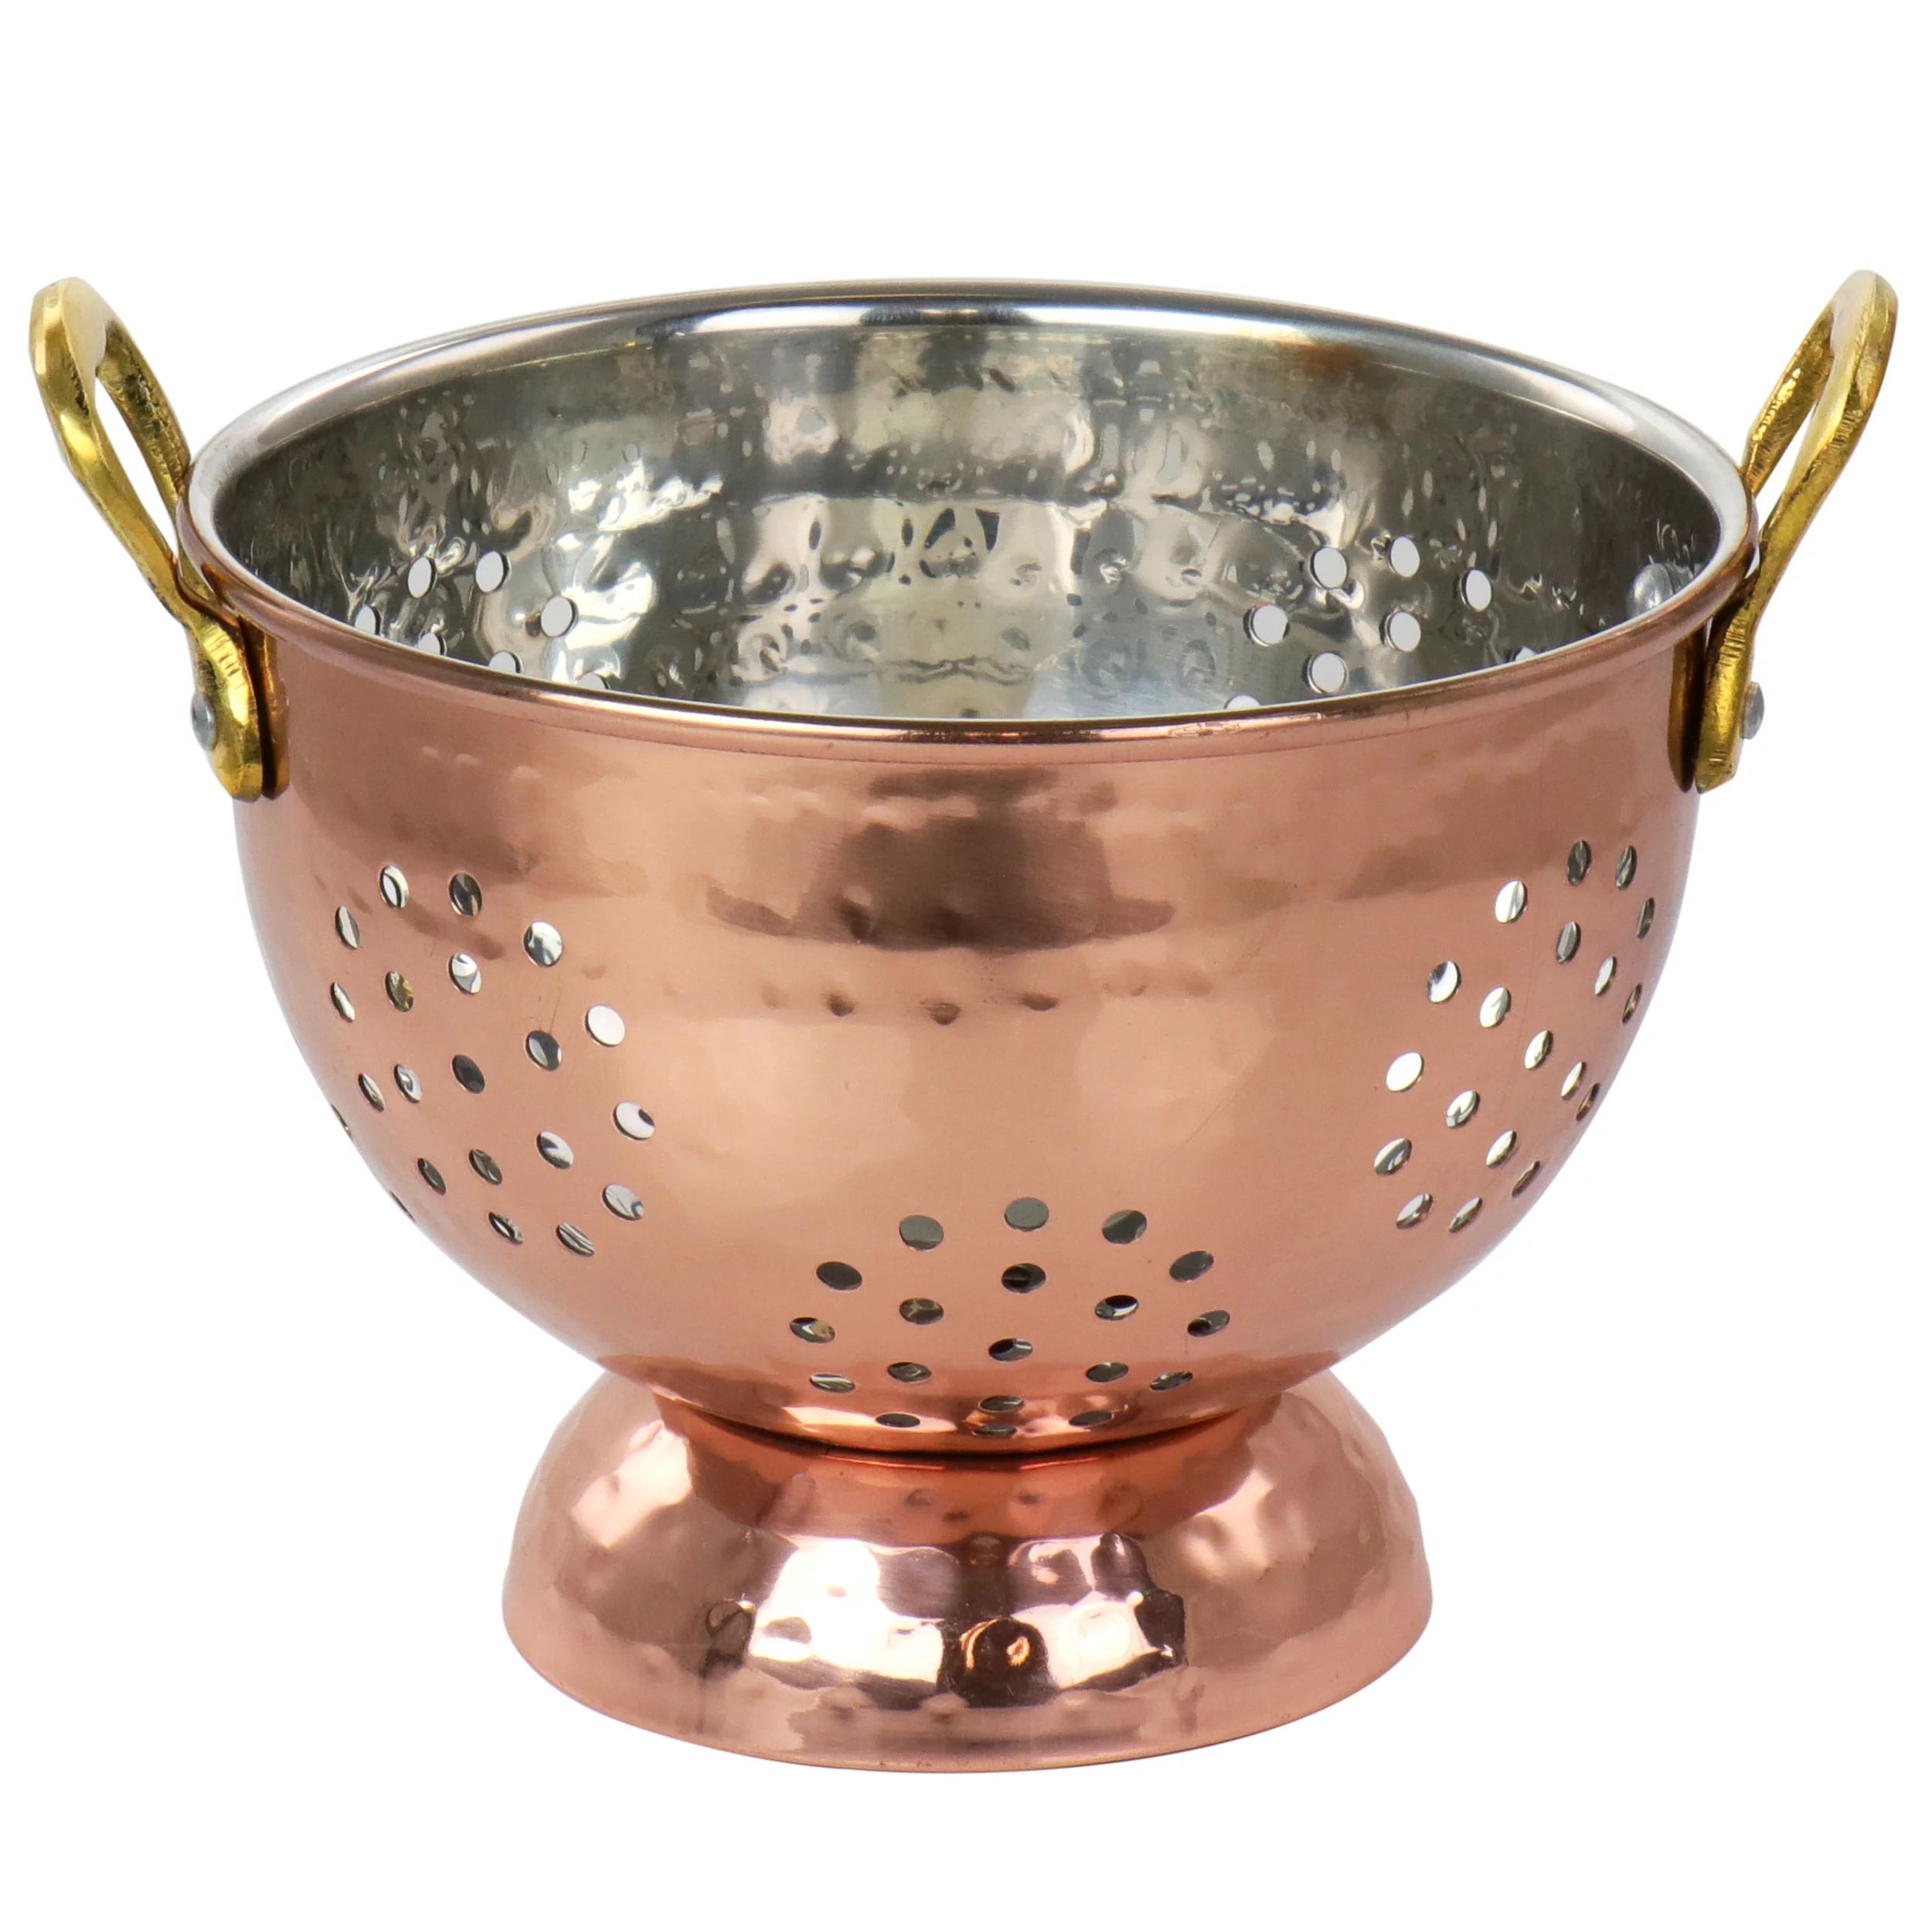 Rembrant 5.7 Inch Stainless Steel Mini Colander in Copper | Walmart (US)